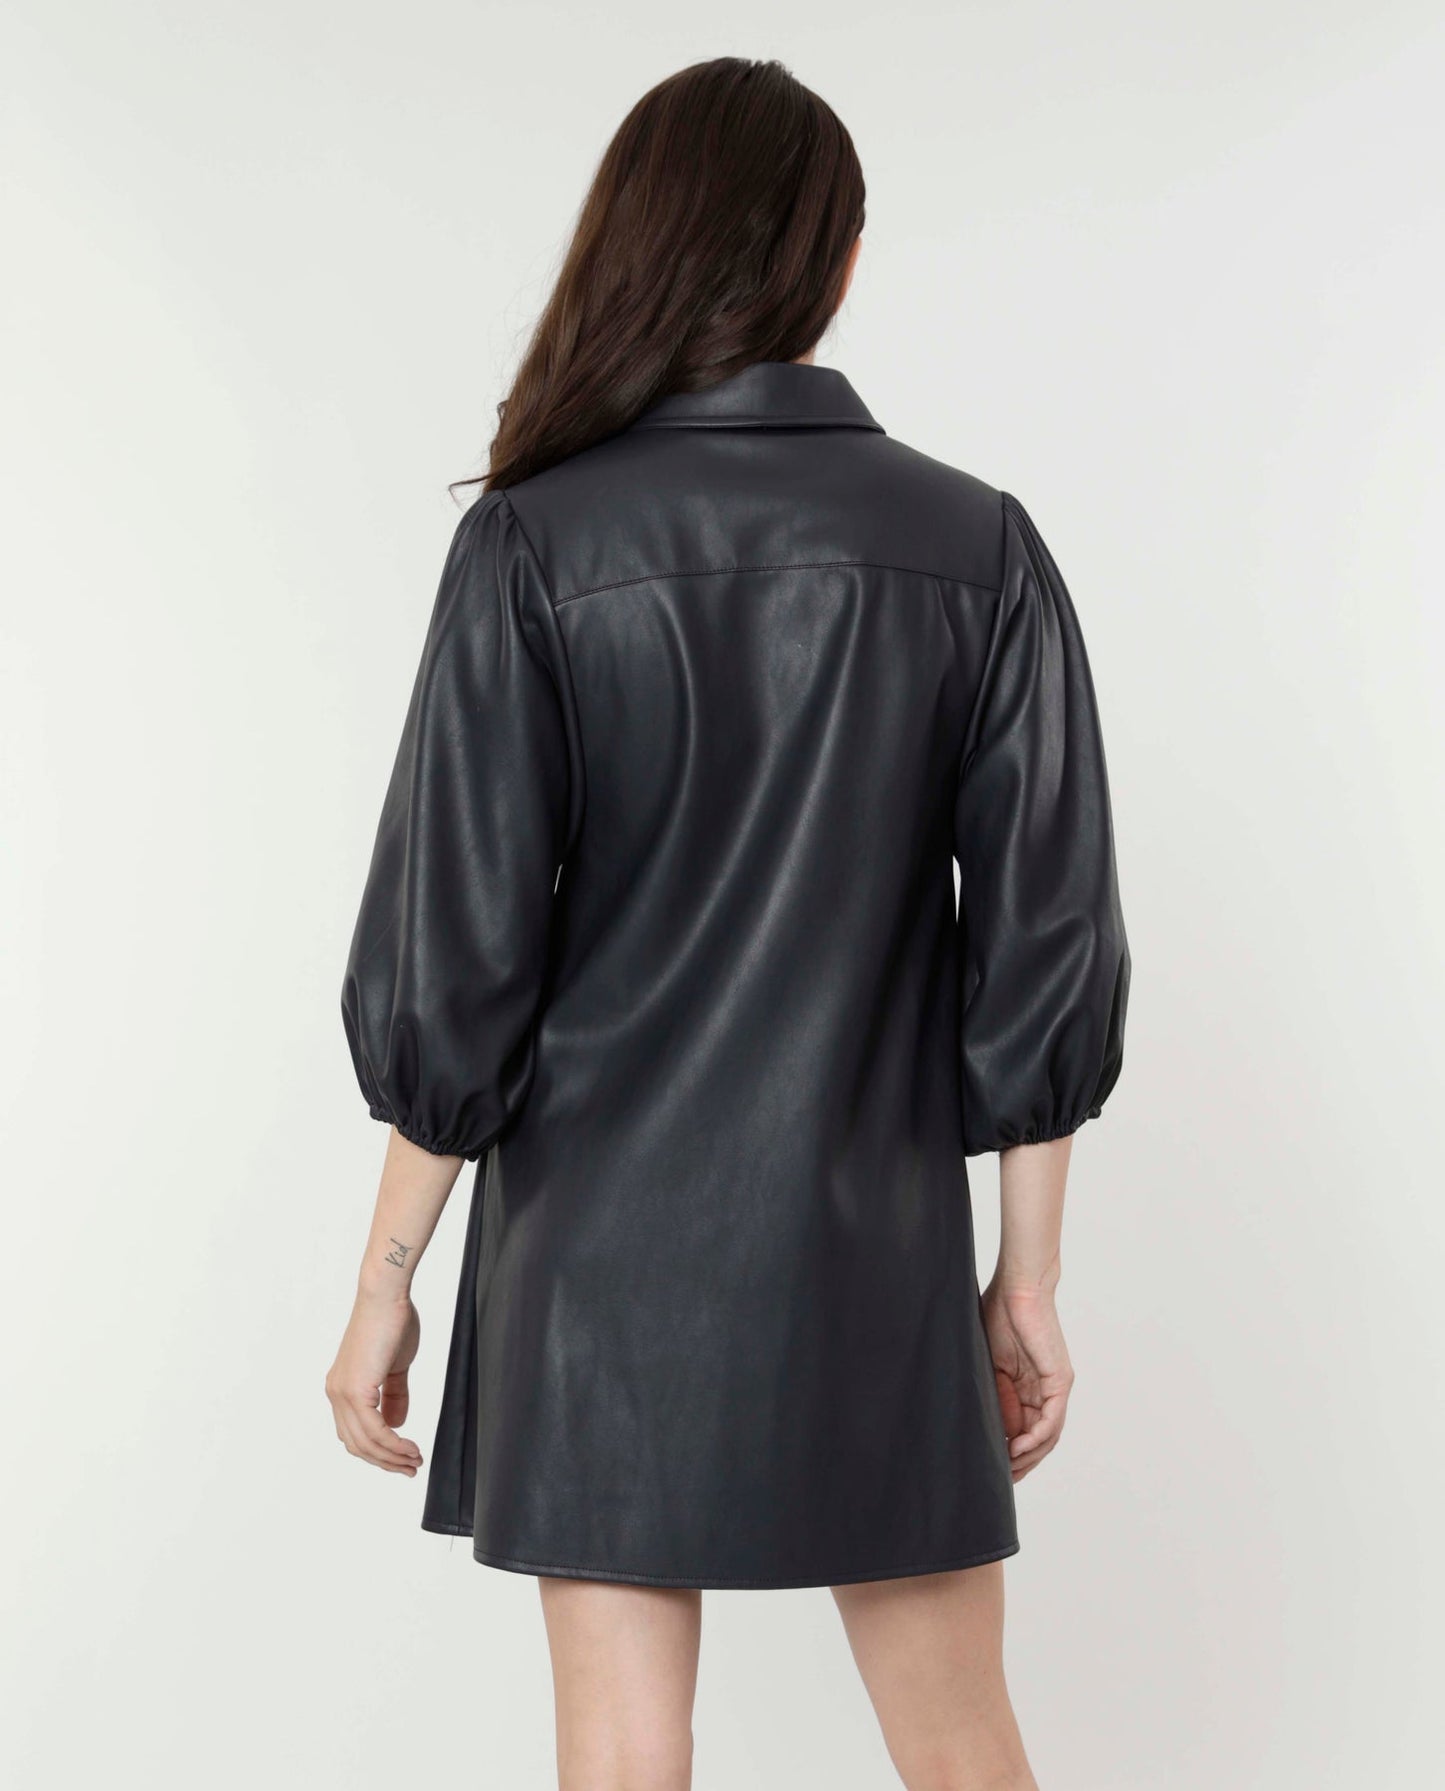 Dolce Cabo Soft Vegan Leather Tunic.